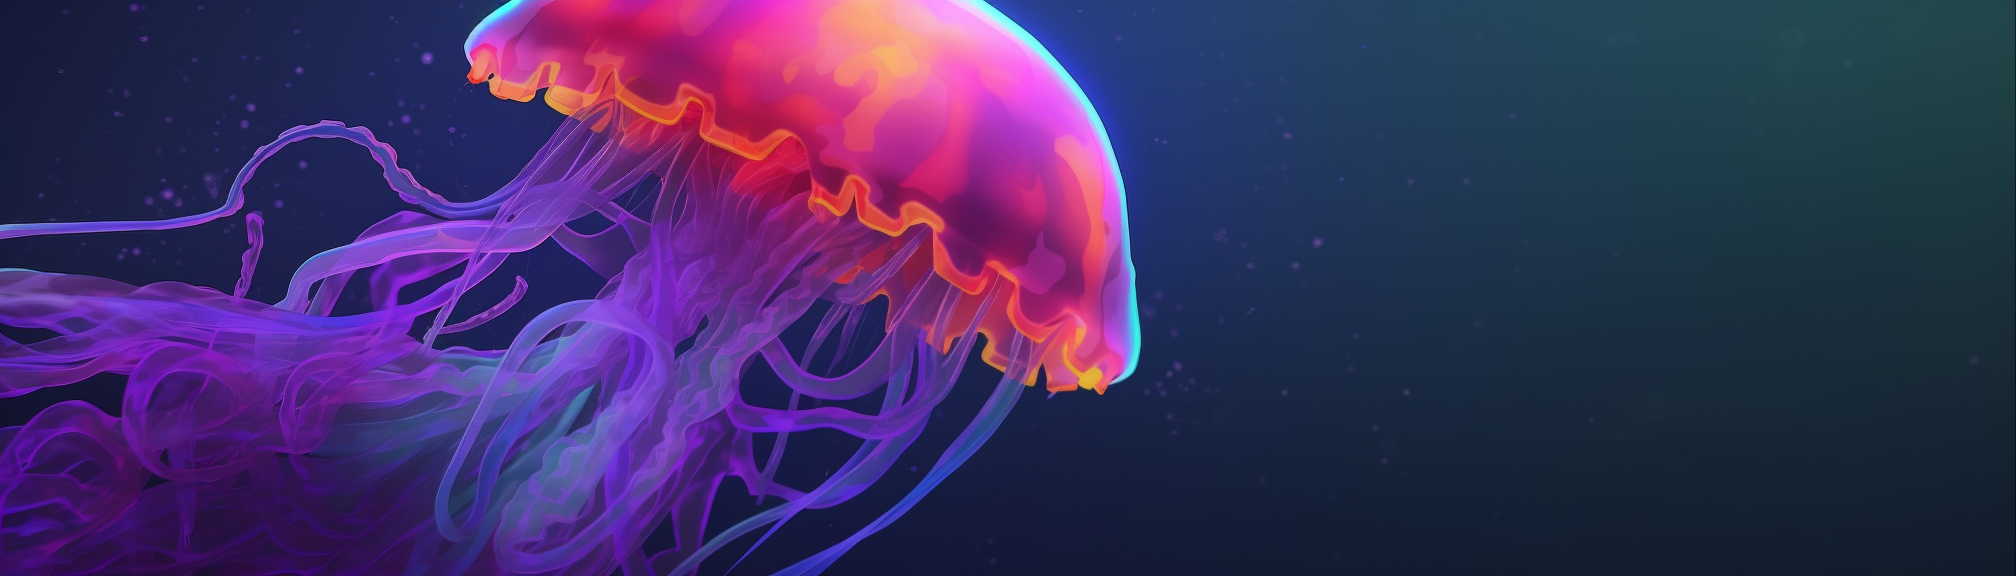 Agile Software is an Immortal Jellyfish